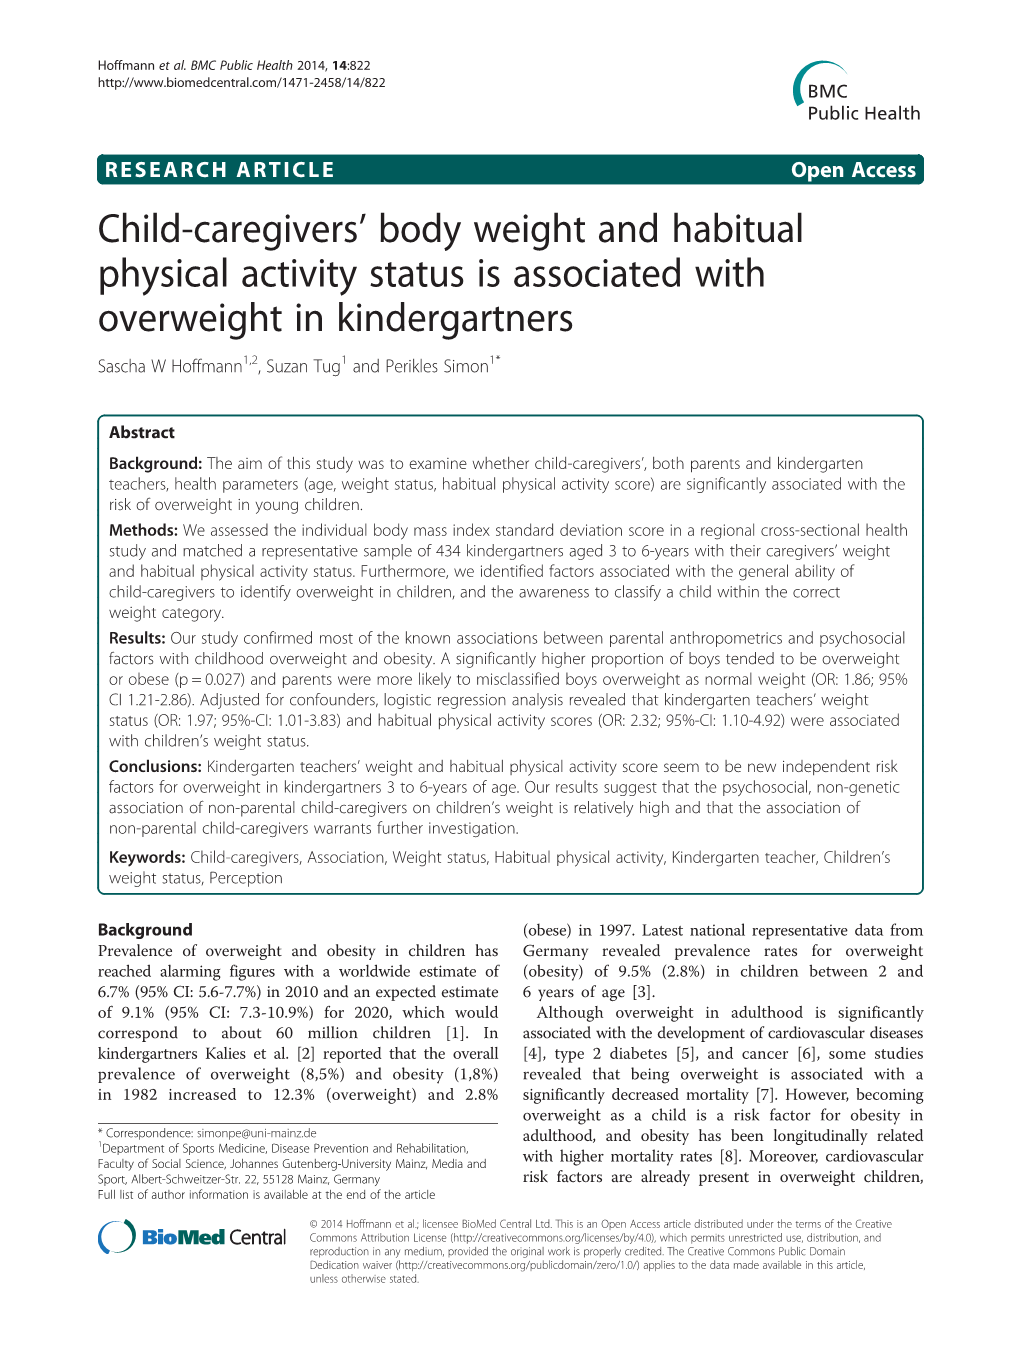 Child-Caregivers' Body Weight and Habitual Physical Activity Status Is